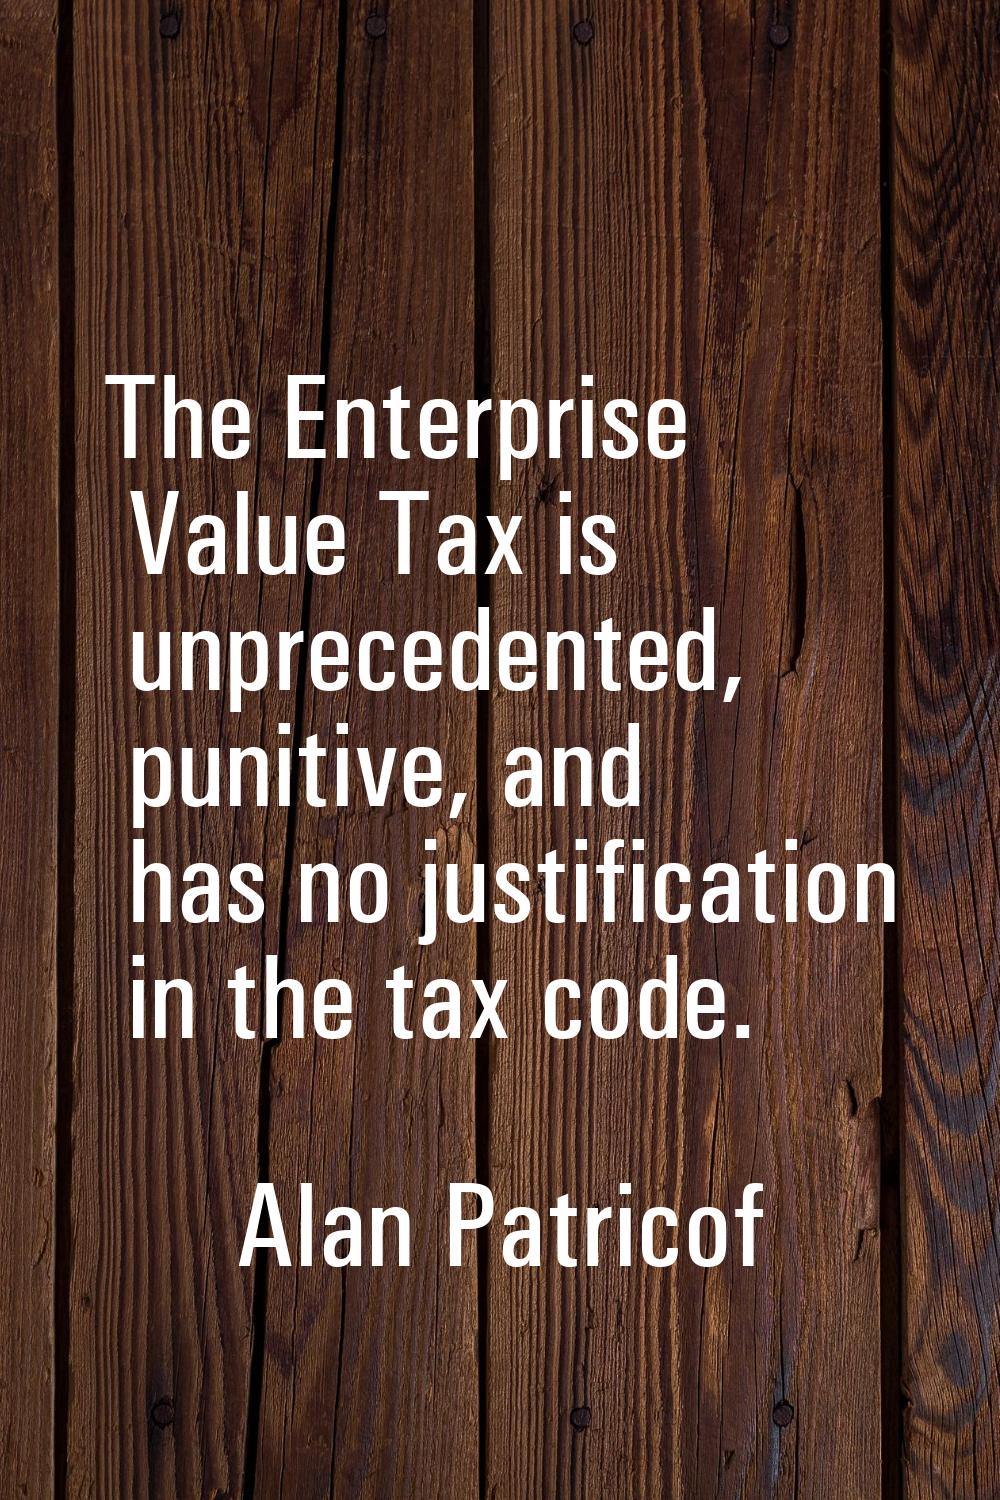 The Enterprise Value Tax is unprecedented, punitive, and has no justification in the tax code.